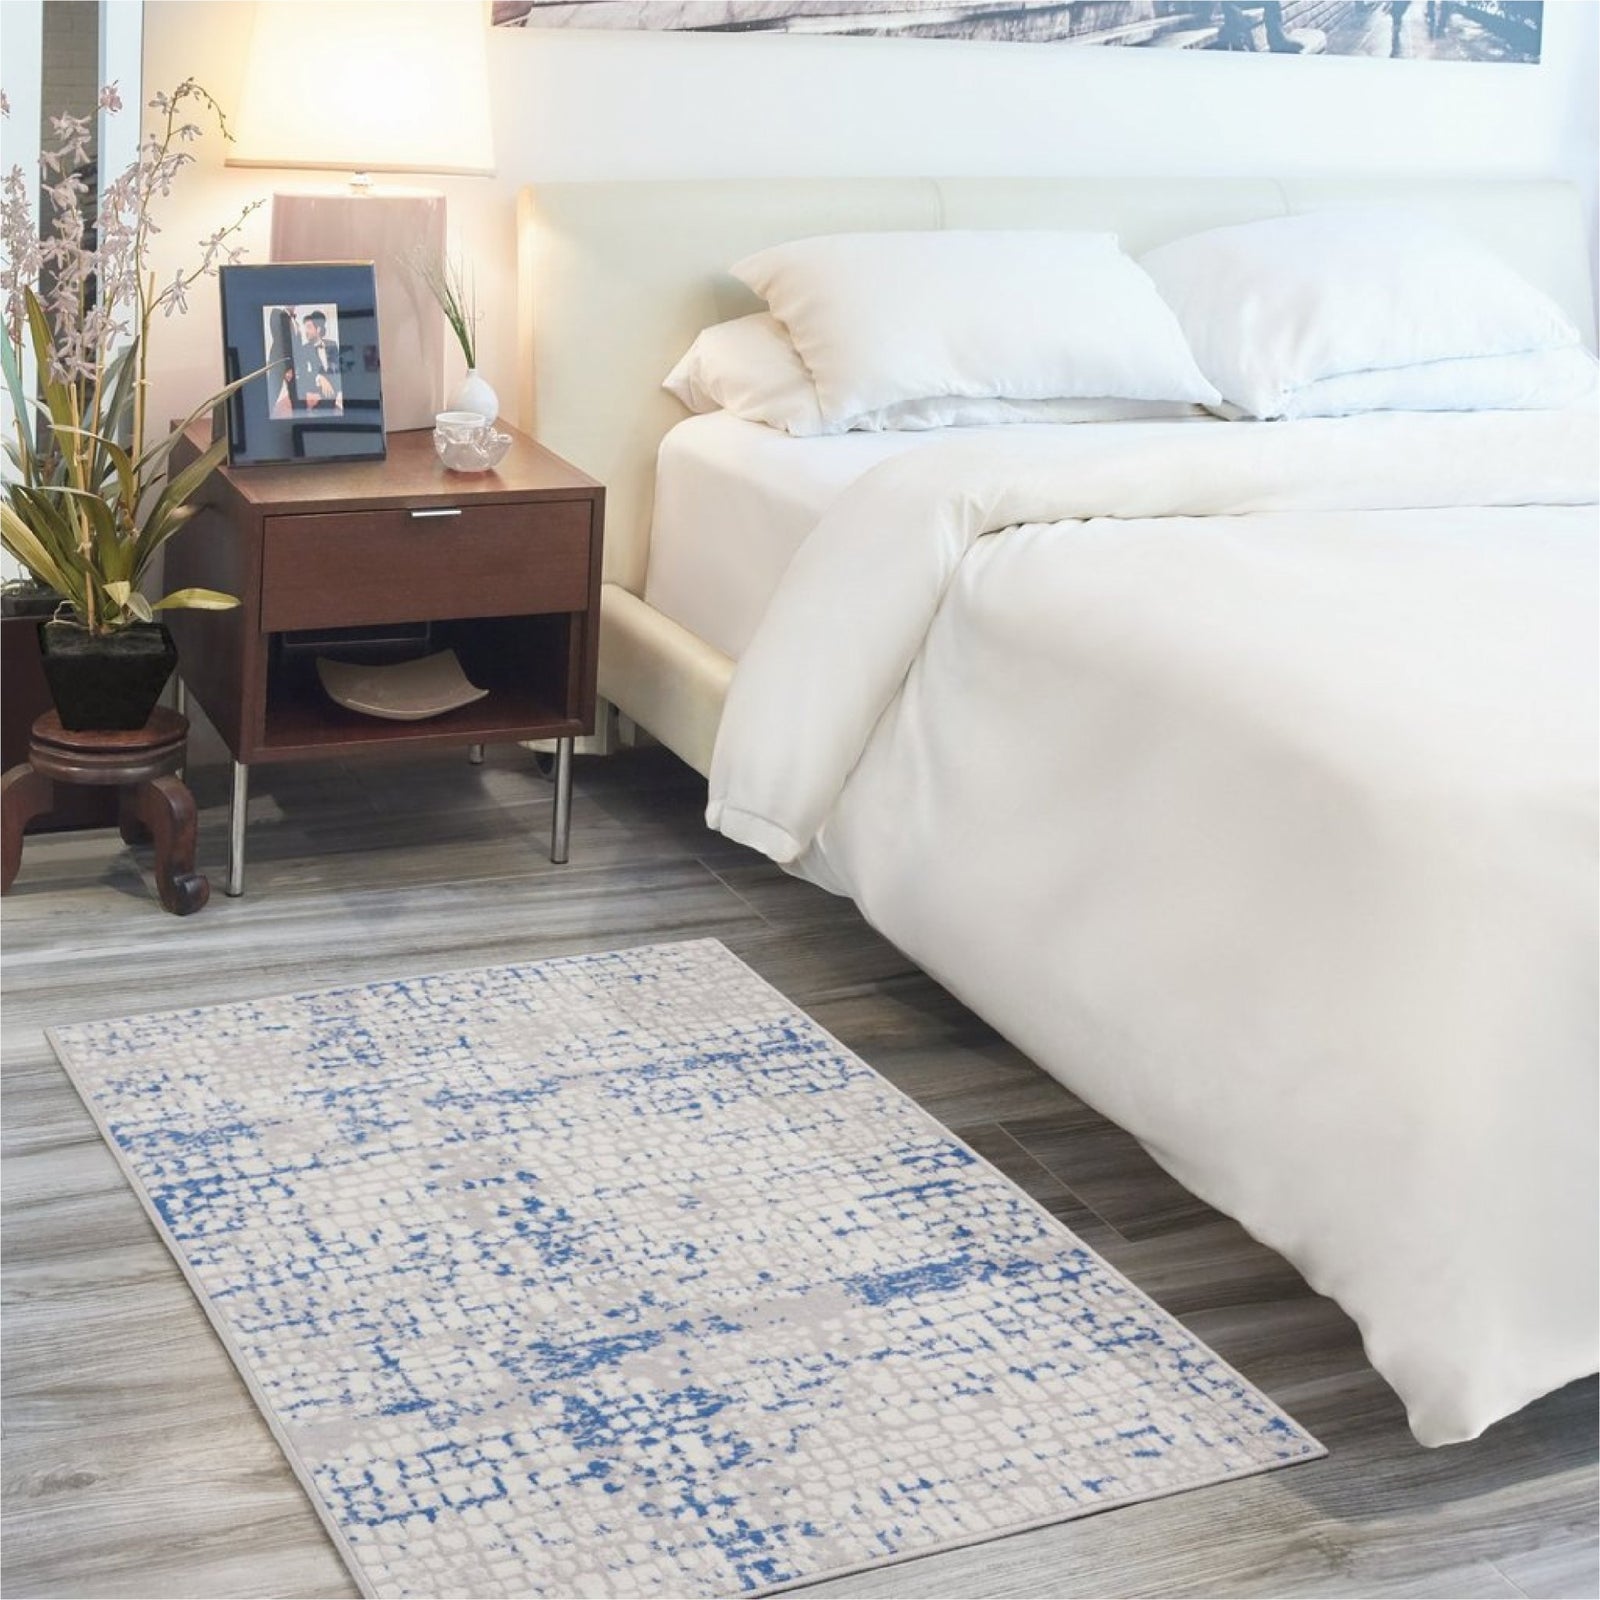 Gray And Blue Abstract Grids Area Rug - 4’ x 6’